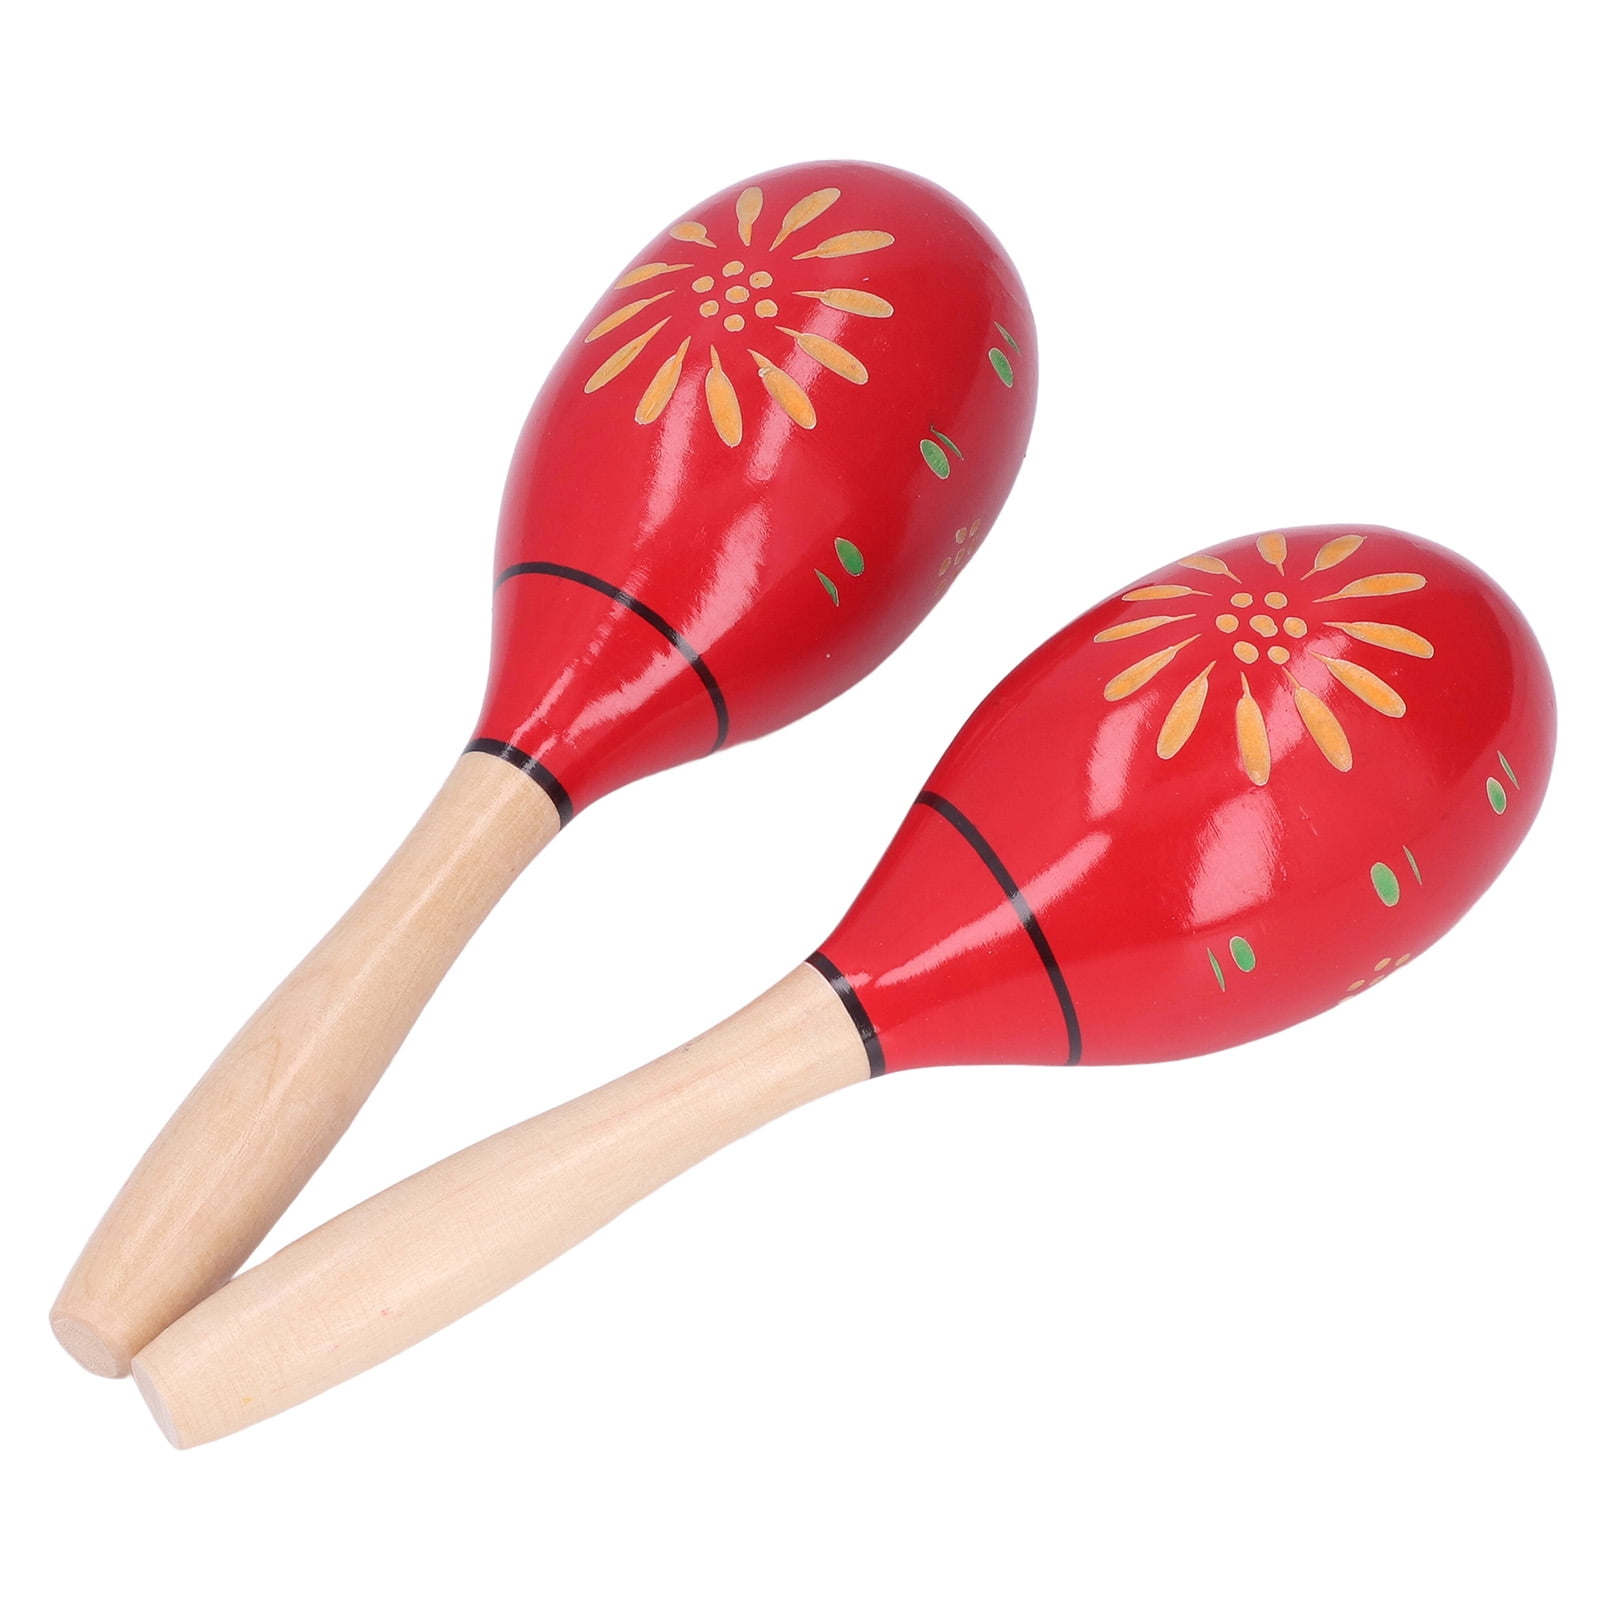 Jive Maracas Large Wooden Maracas Rattle Shaker Percussion Instrument Hand Painted Pair Brand 